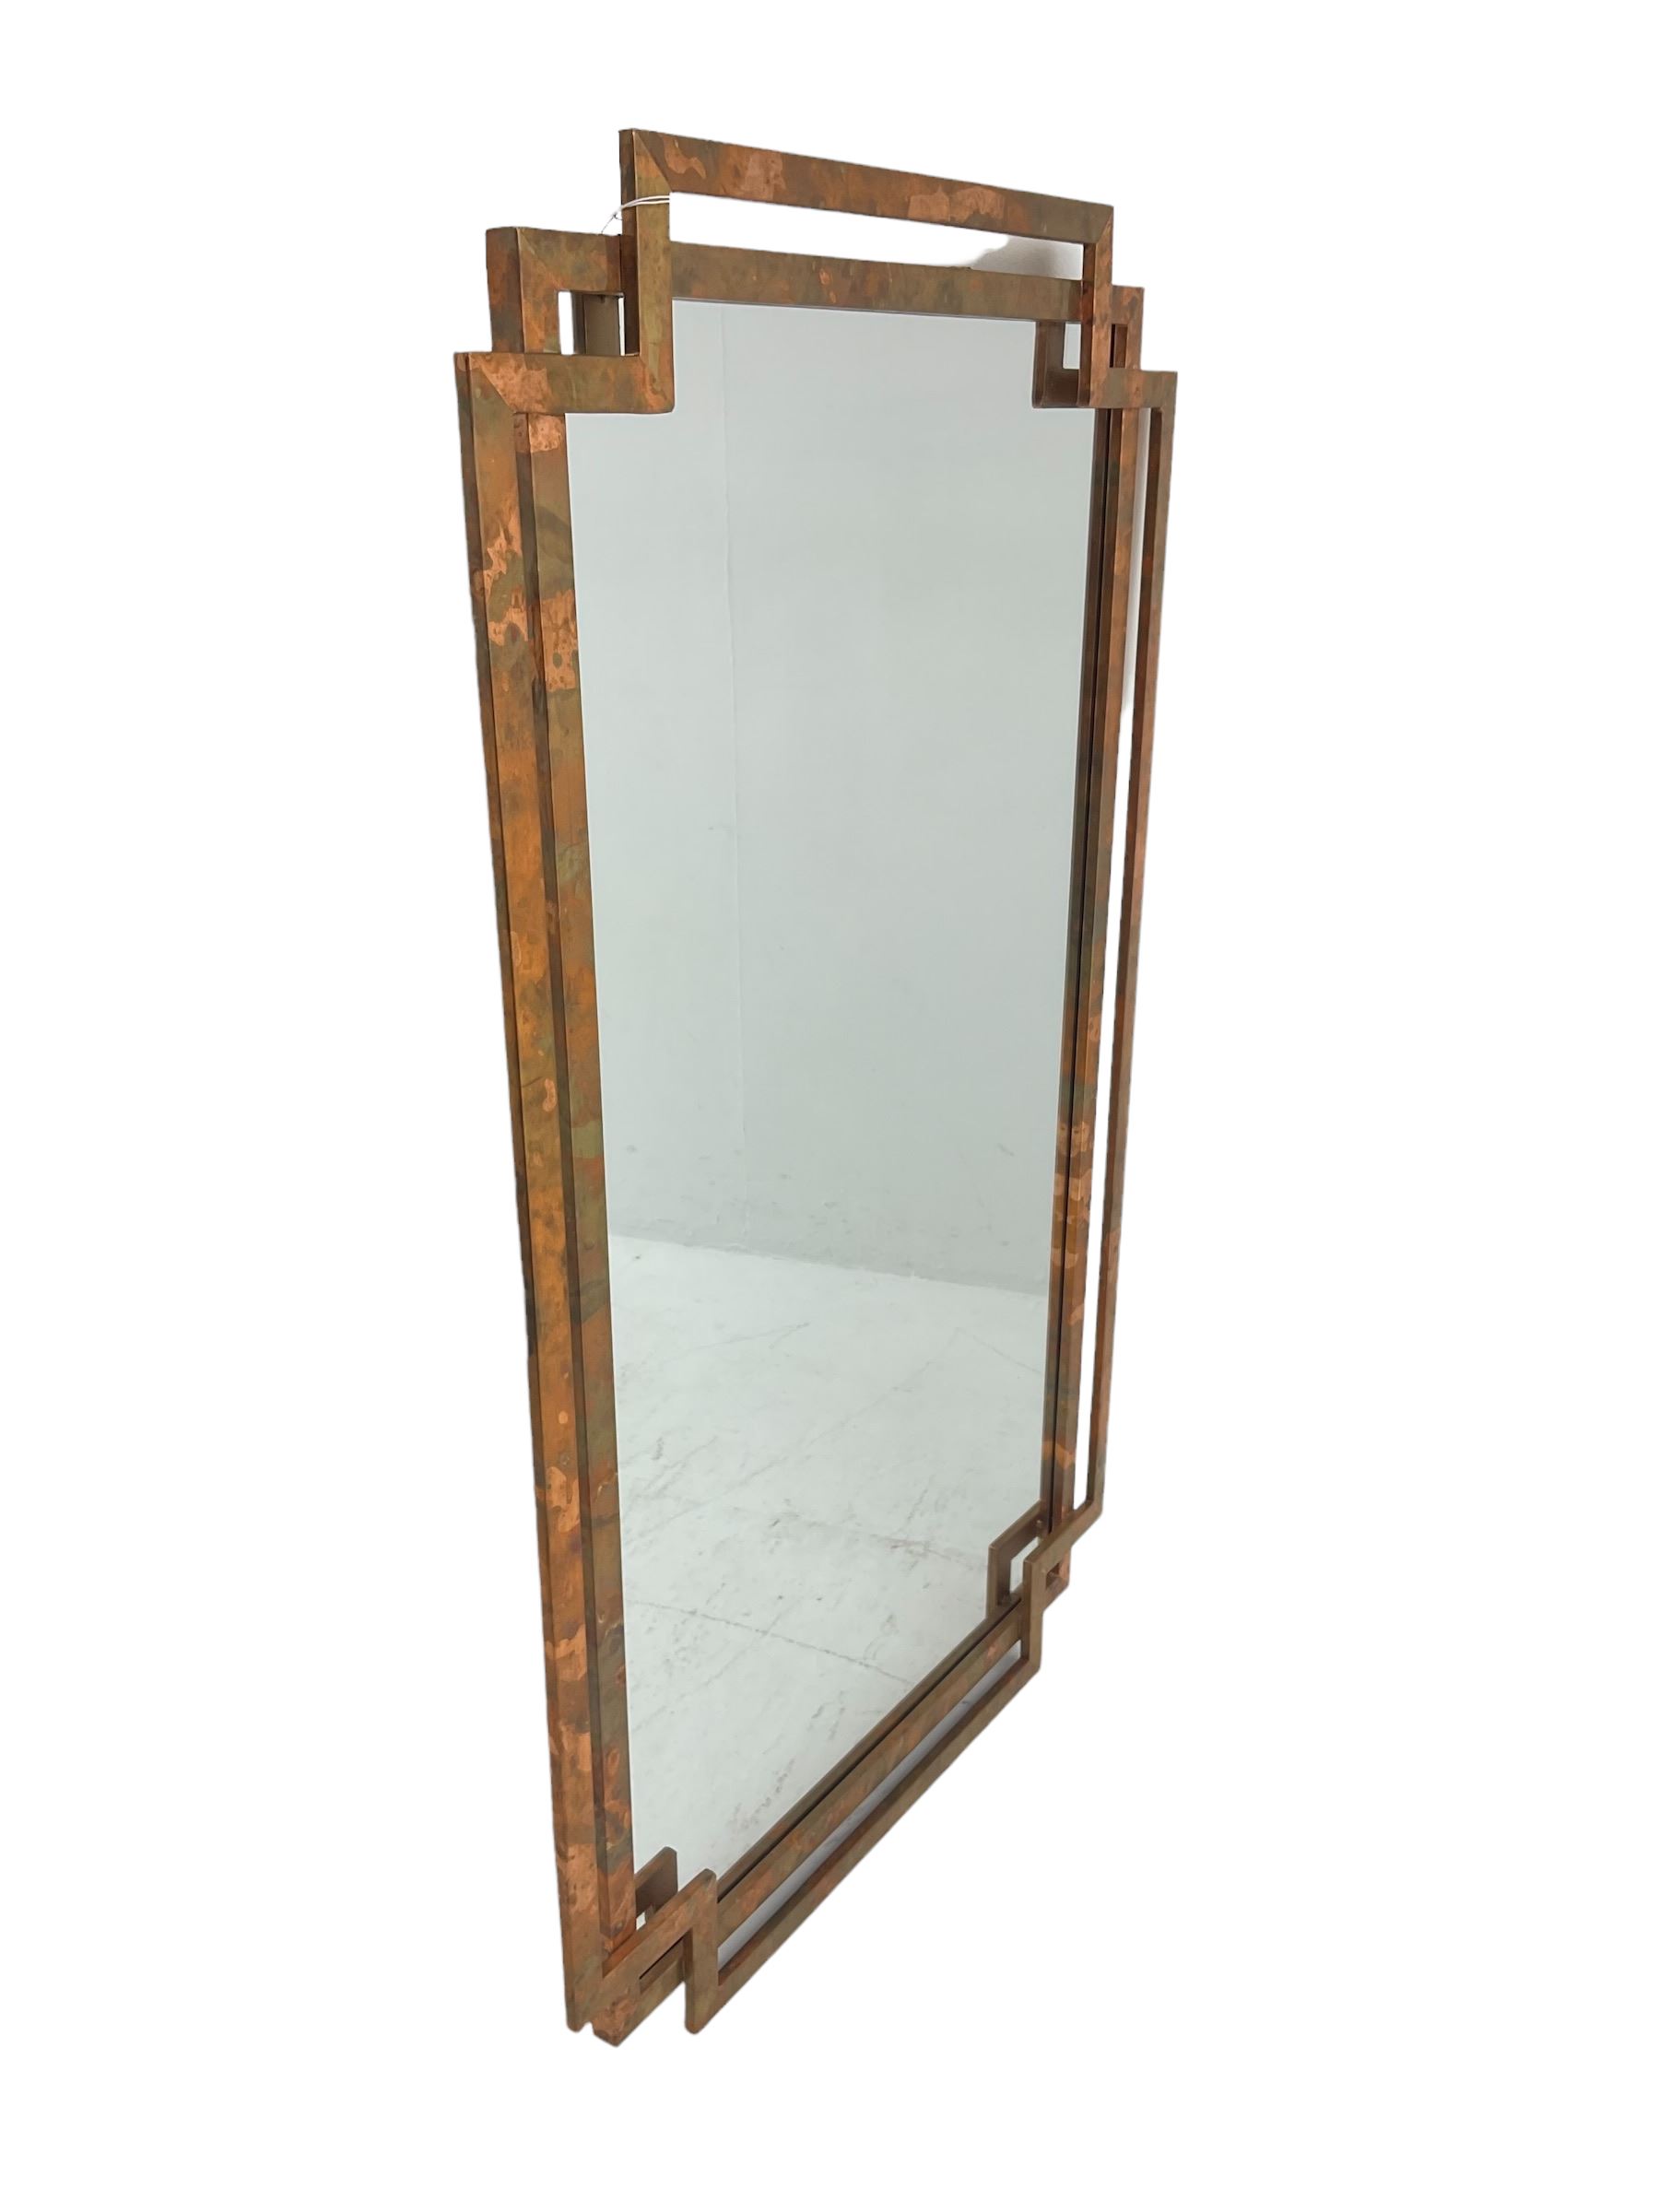 Contemporary copper framed rectangular wall mirror - Image 3 of 4